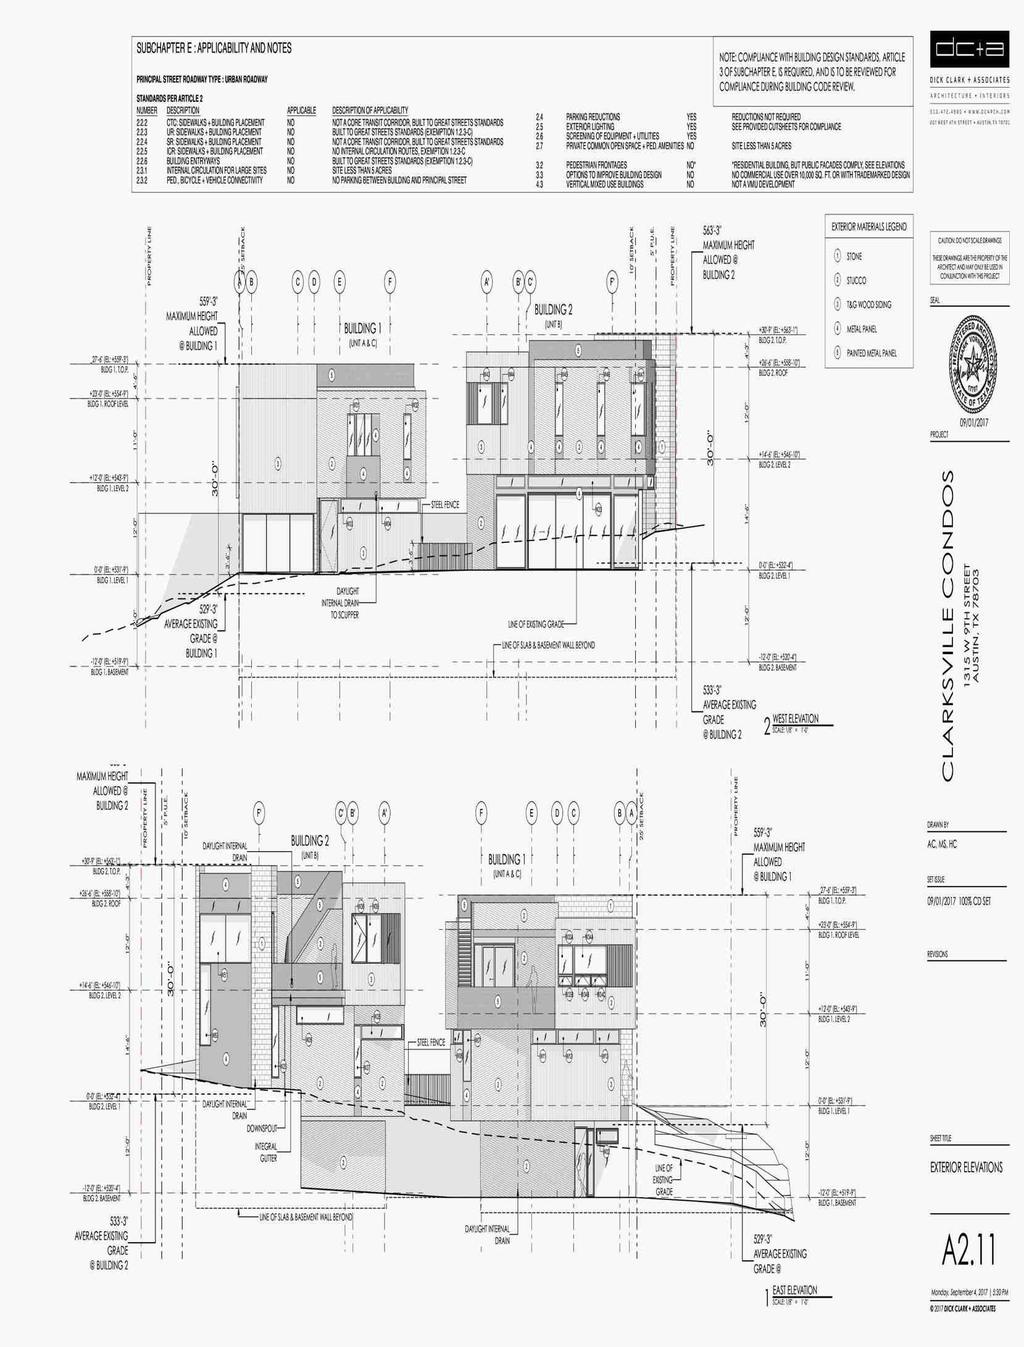 Plans and Elevations - Page 5 Form SCNLGL - "TOTAL"